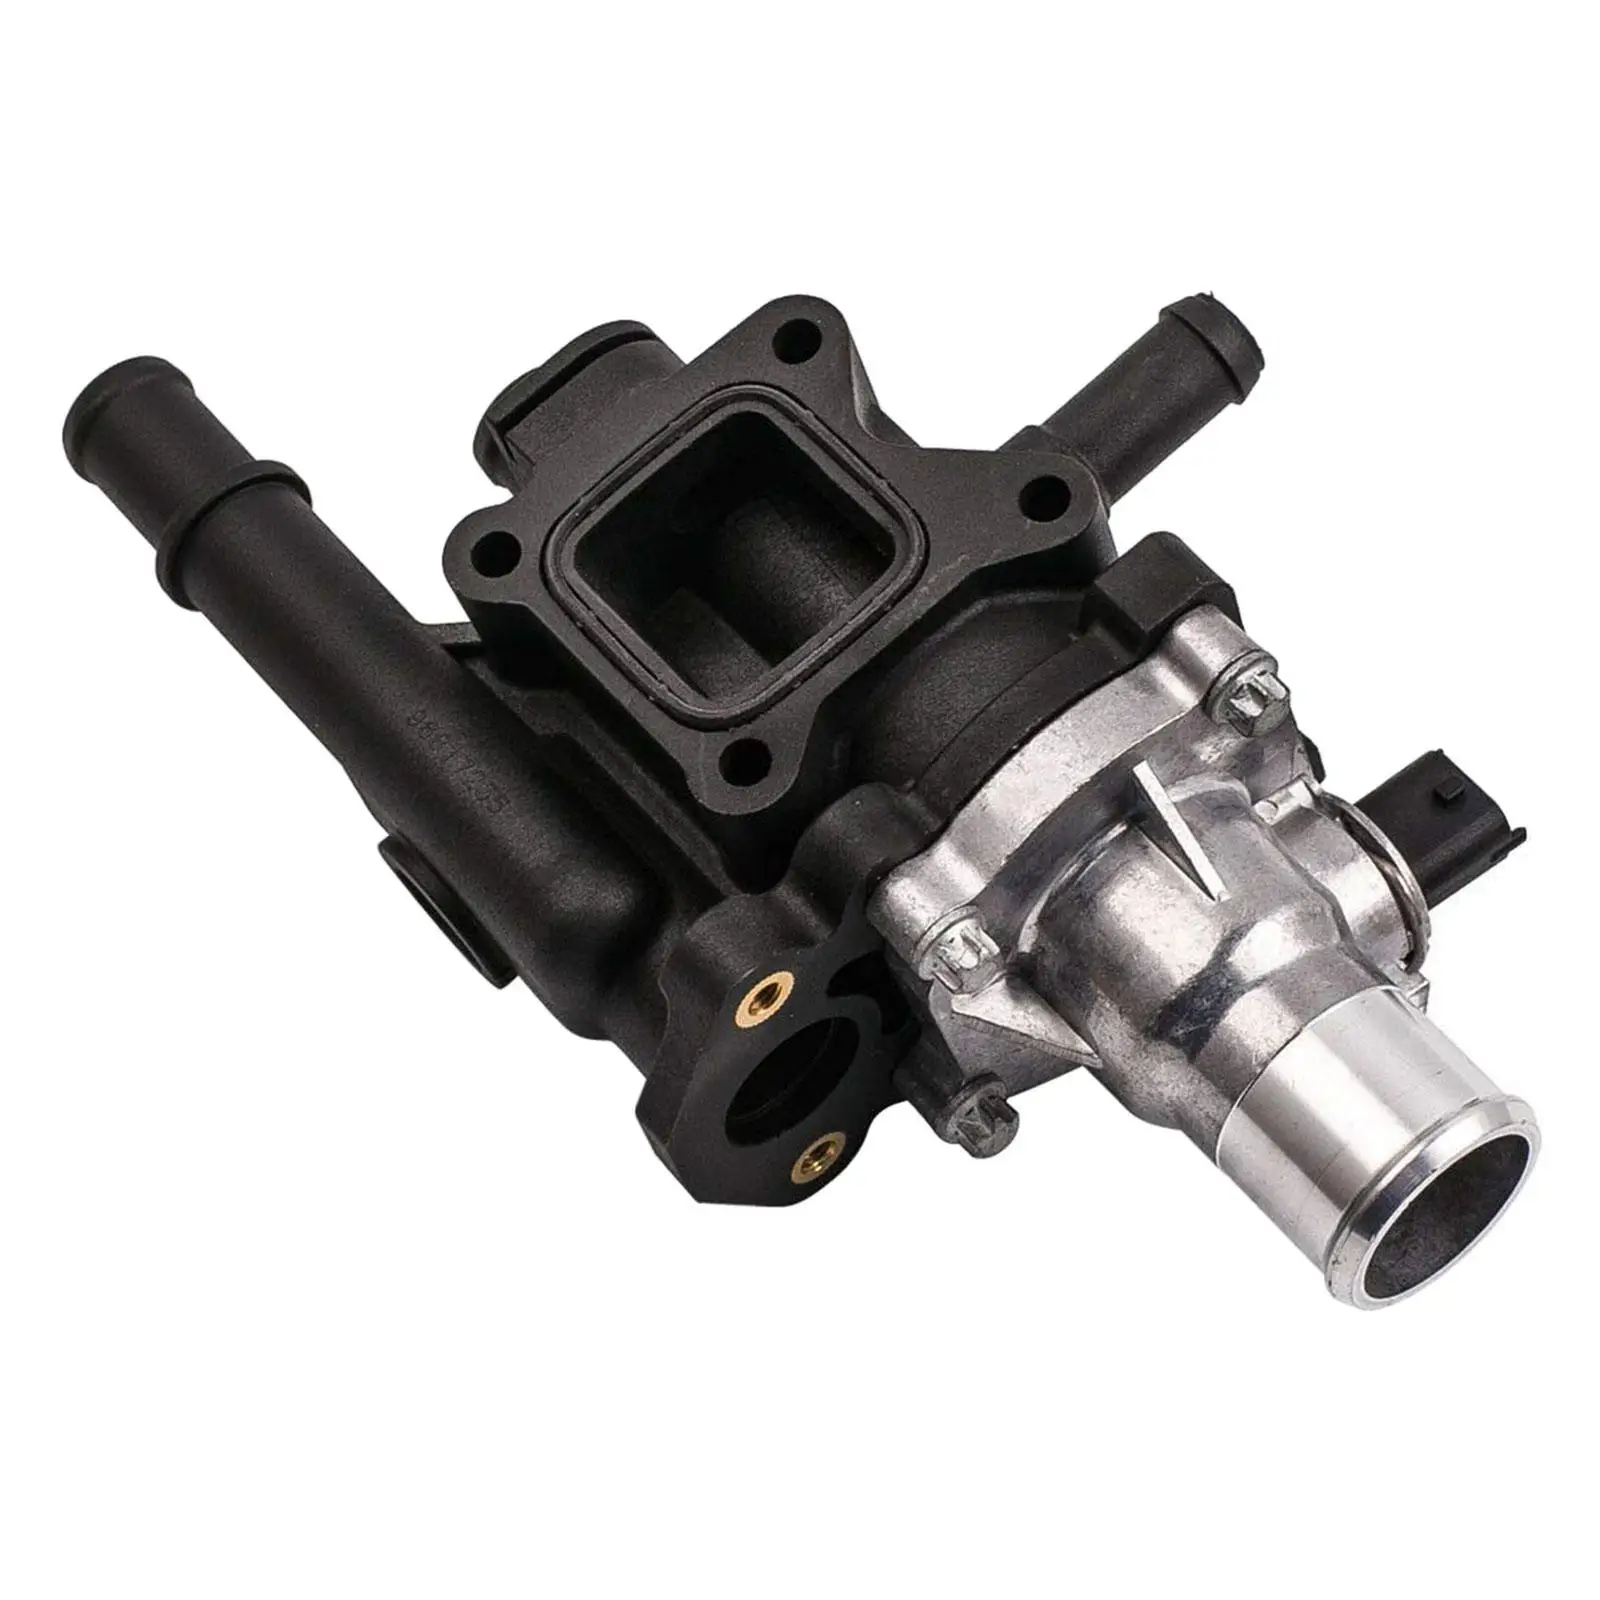 Engine Coolant Thermostat Housing Assembly with Sensor 55564890 High Performance Auto Parts Replaces Durable for Fiat Croma